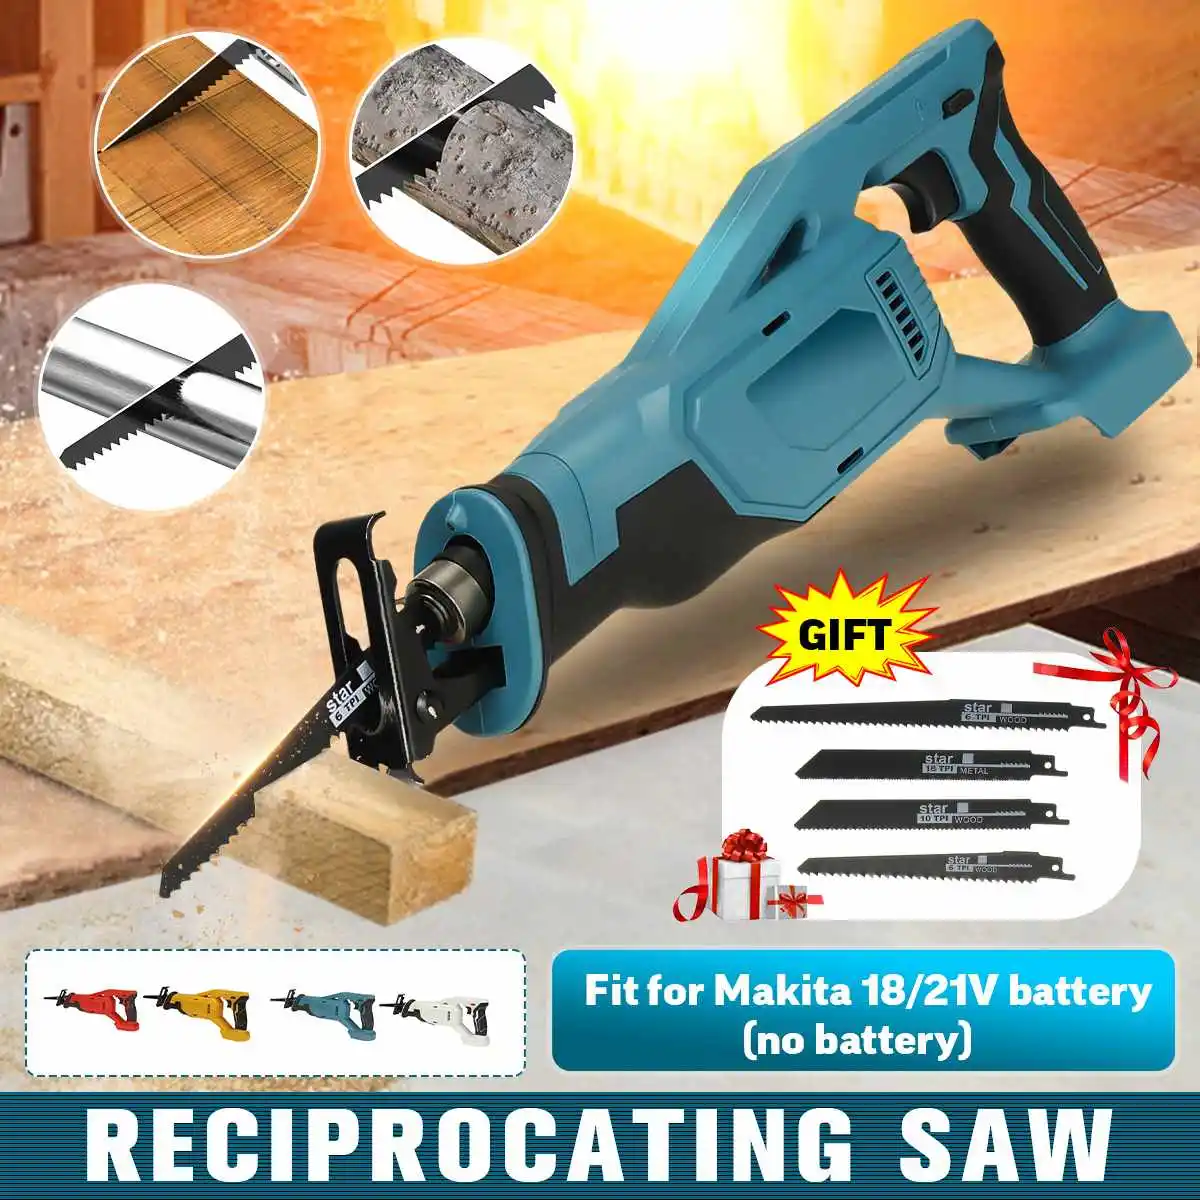 

Electric Saw Handheld Cordless Reciprocating Saw No Battery One-Handed Saw With 4 Blades Metal Wood Cutter Tool For Makita 18V